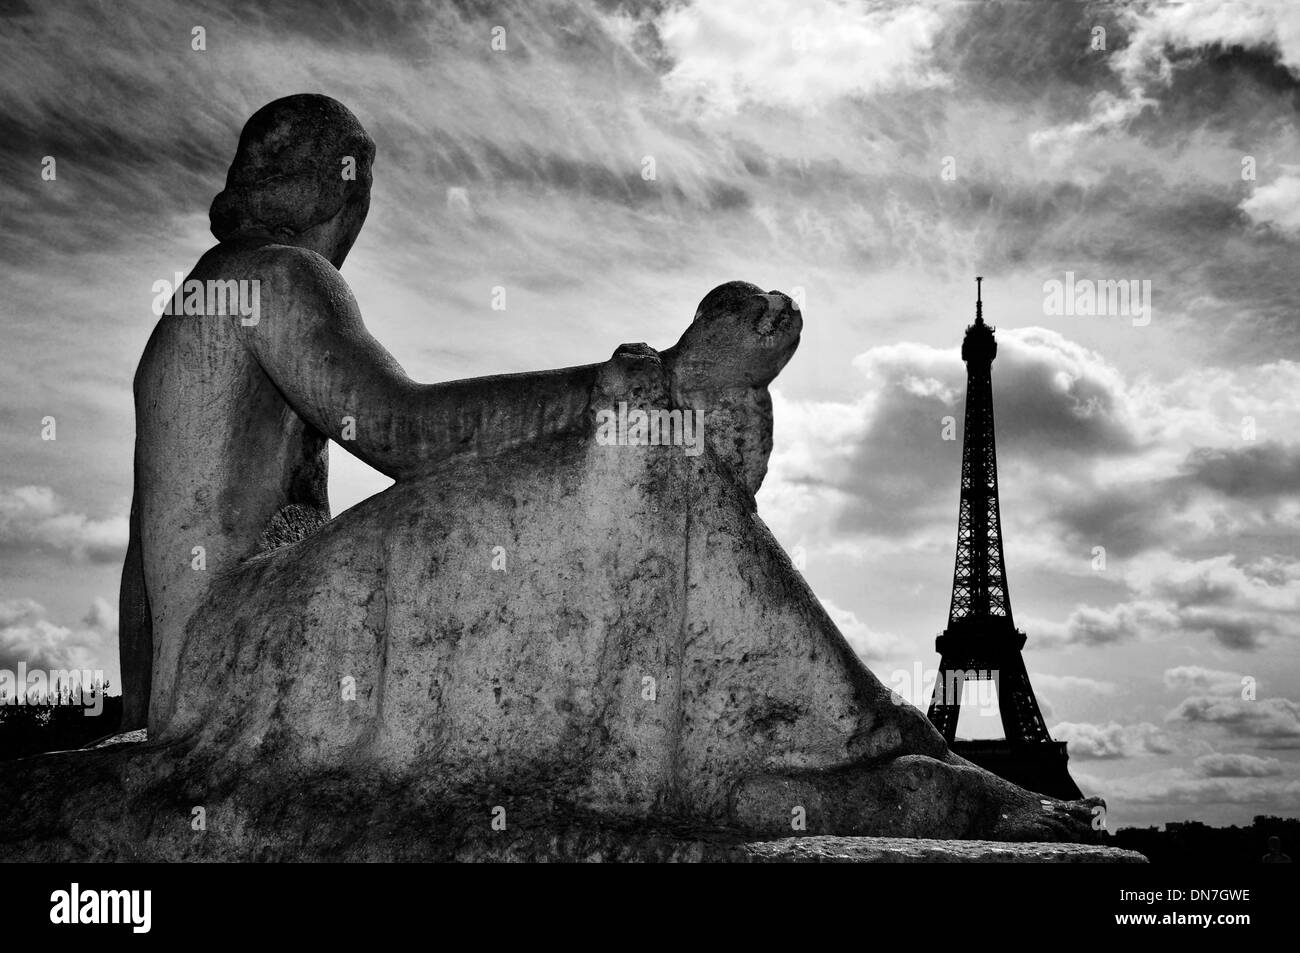 view of the Eiffel Tower in Paris, France, from Jardins du Trocadero, in black and white Stock Photo